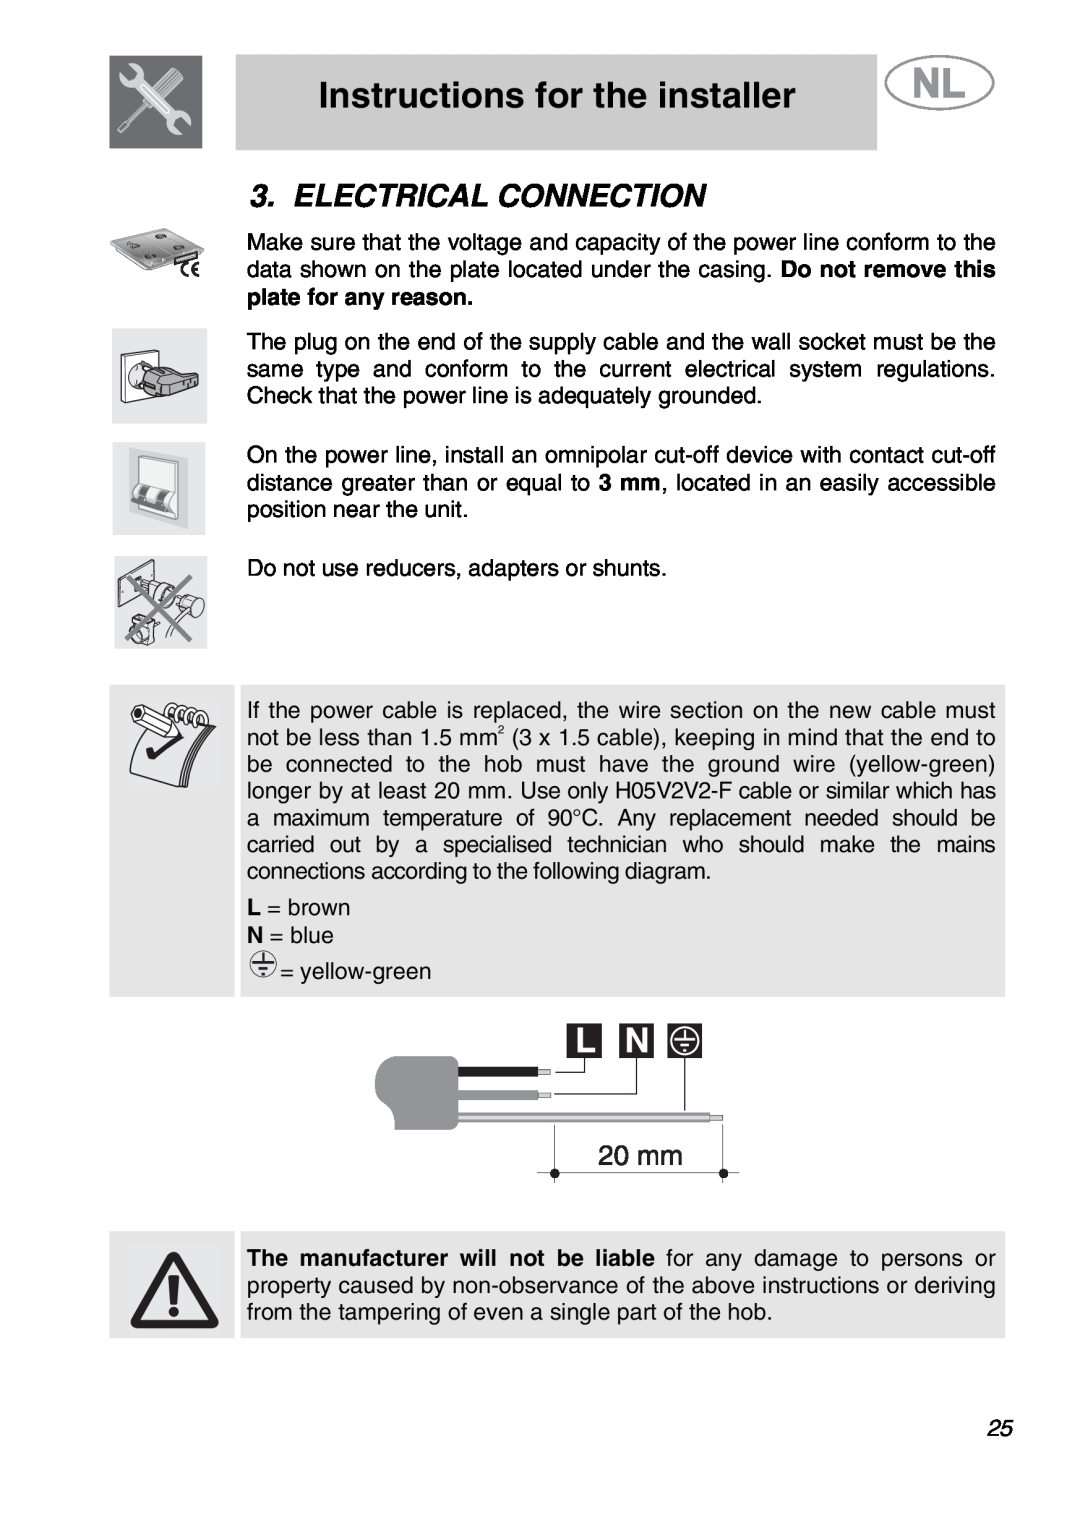 Smeg GKCO955, GKC955 manual Electrical Connection, Instructions for the installer, plate for any reason 